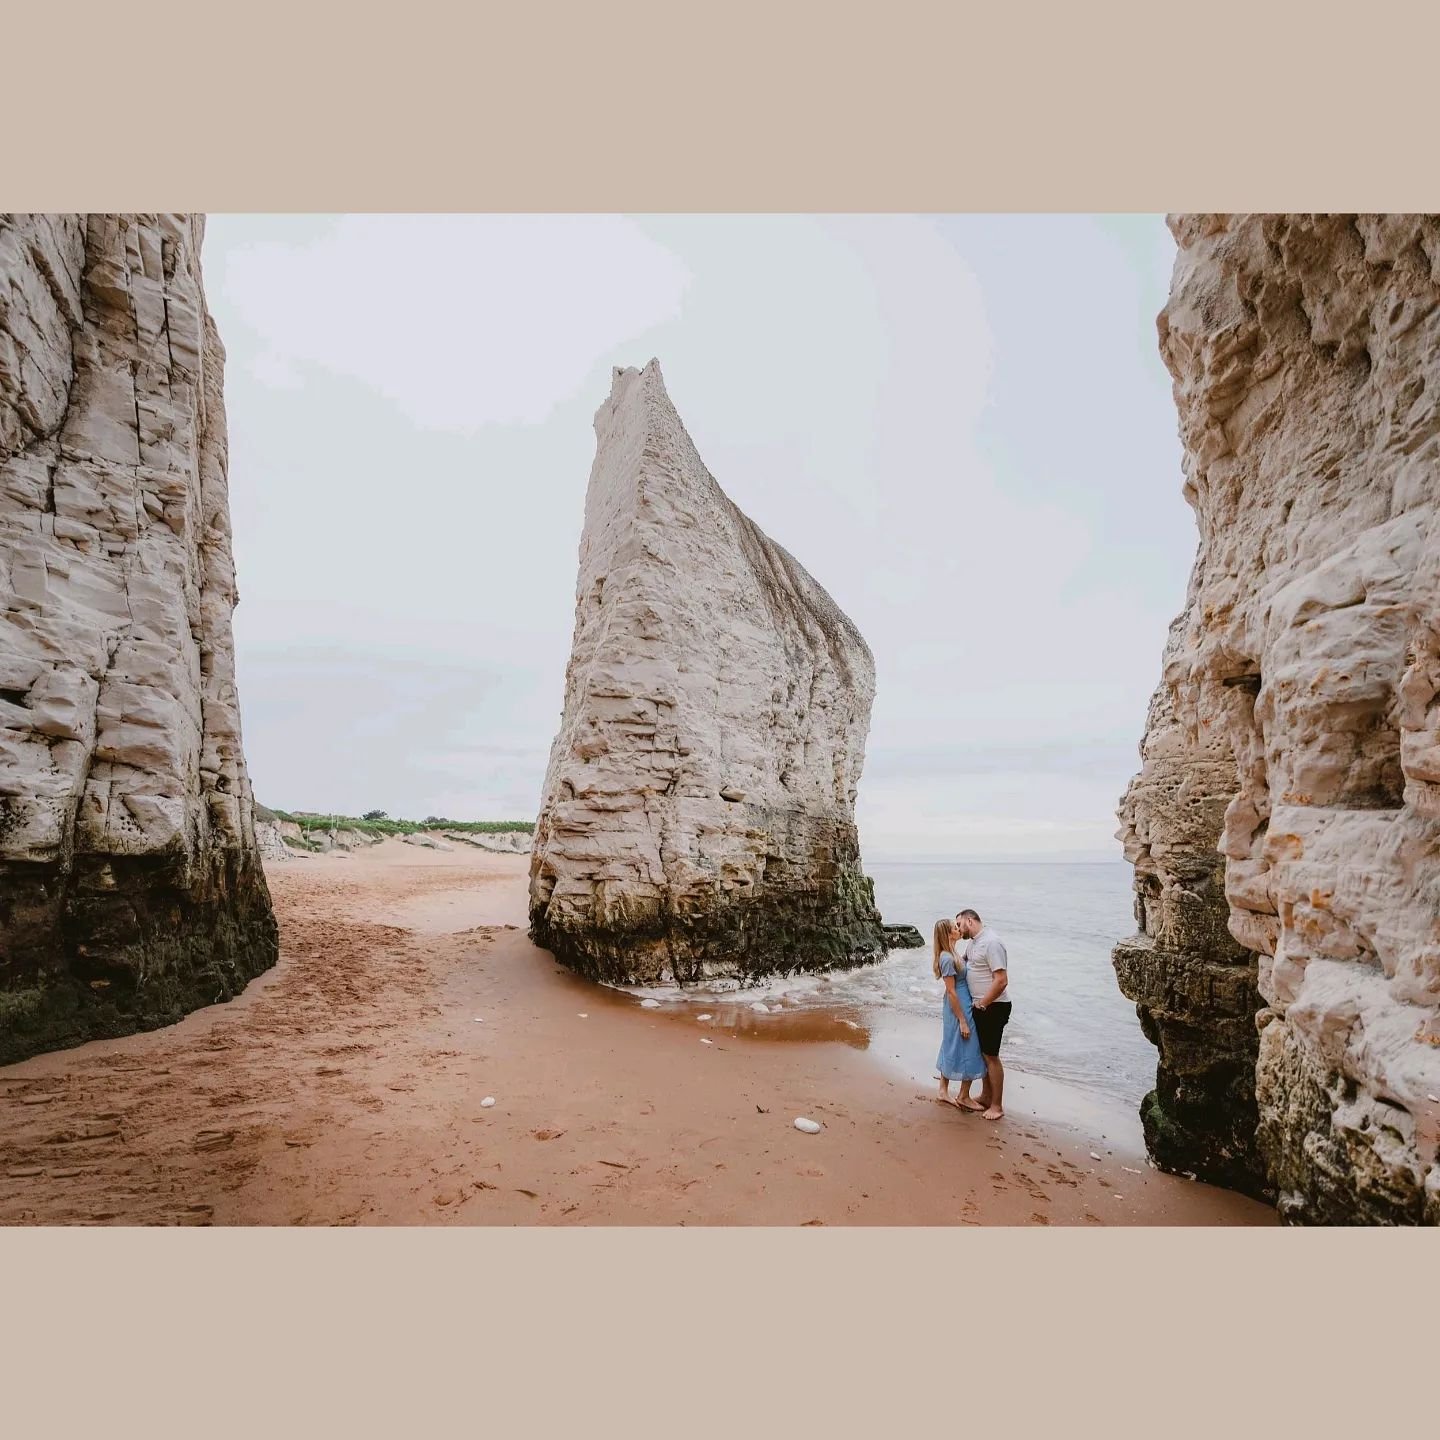 Georgina &amp; Peter's Pre Wedding shoot at Botany Bay. A beautiful evening with sand in between the toes, and the sea breeze in our hair. The only failure was my estimation of wave height compared to my wellies. Video to come shortly.

@miss.georgin